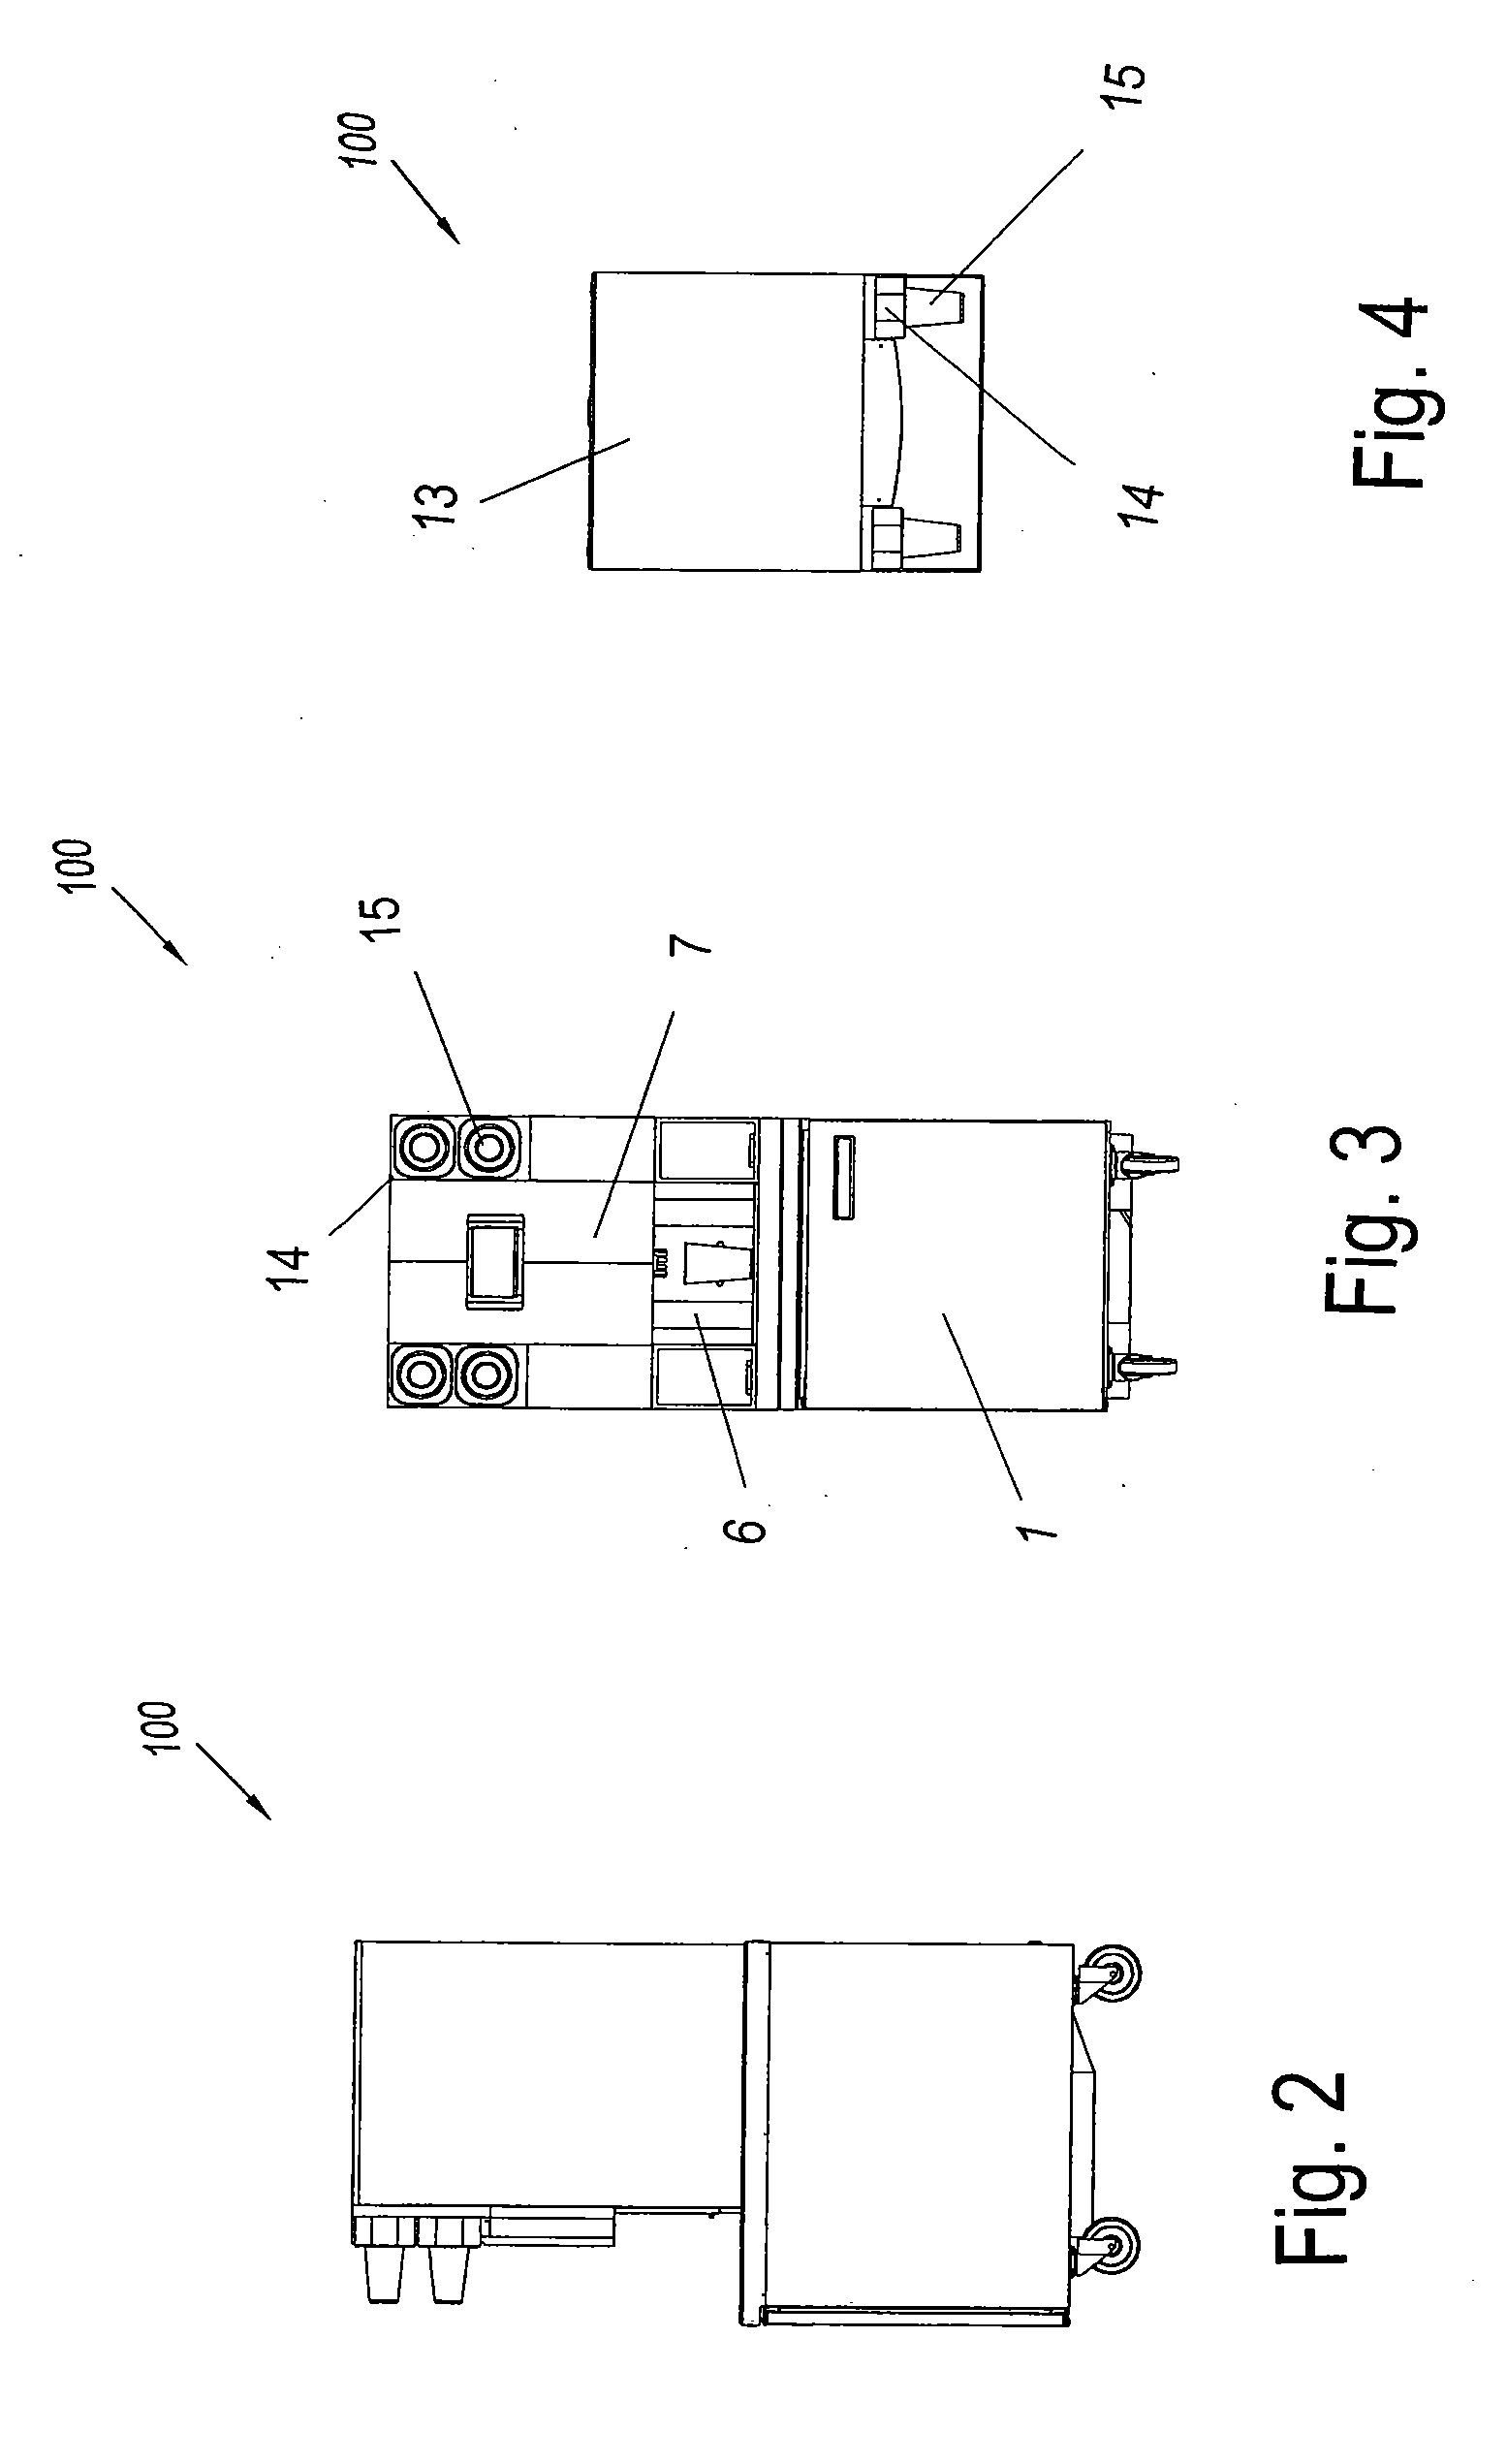 Device and method of creating a beverage recipe for an integrated system for dispensing and blending/mixing beverage ingredients